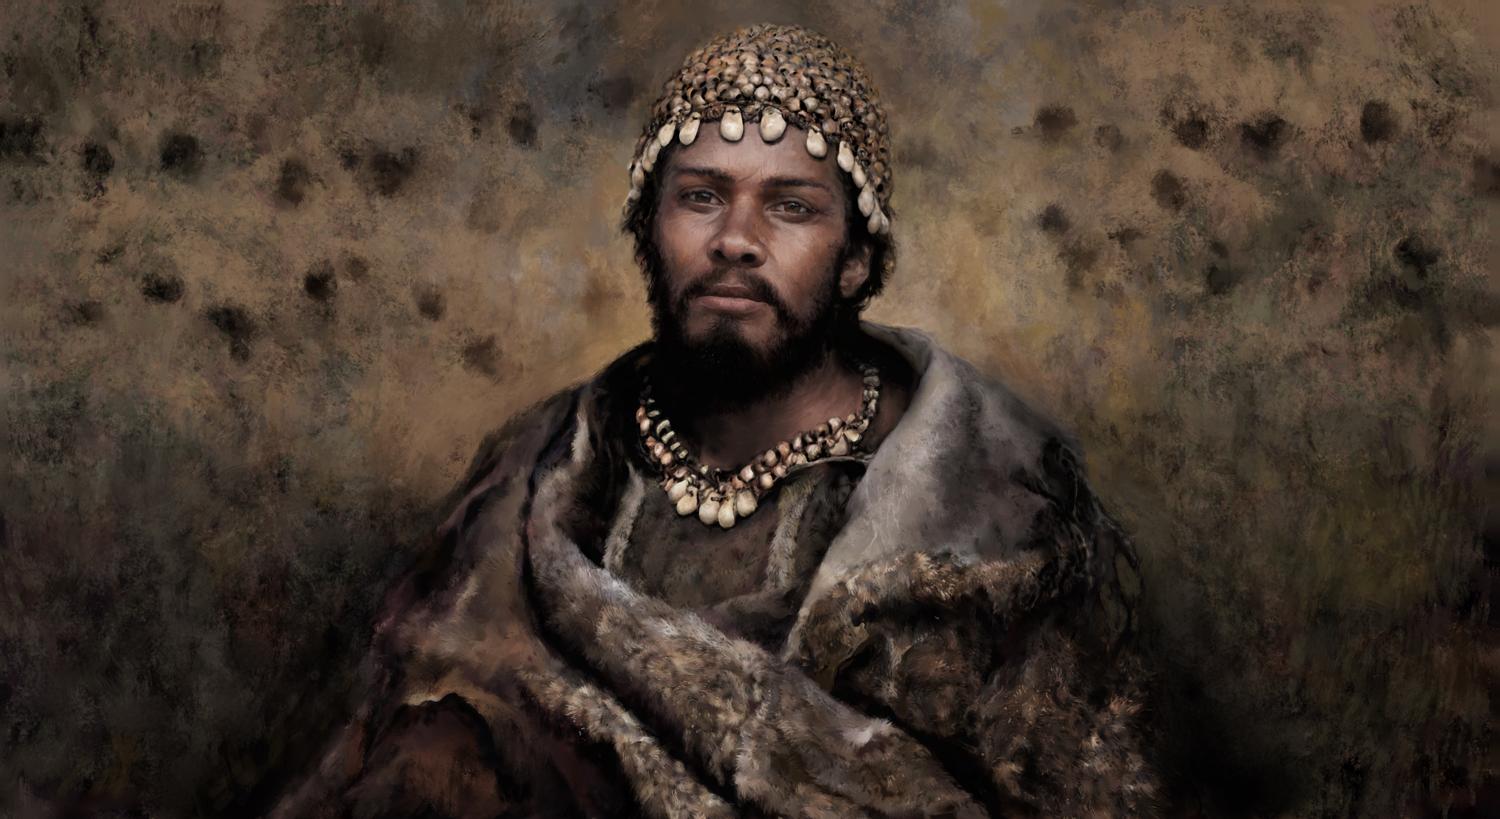 Bearded man with headdress, necklace and fur cape